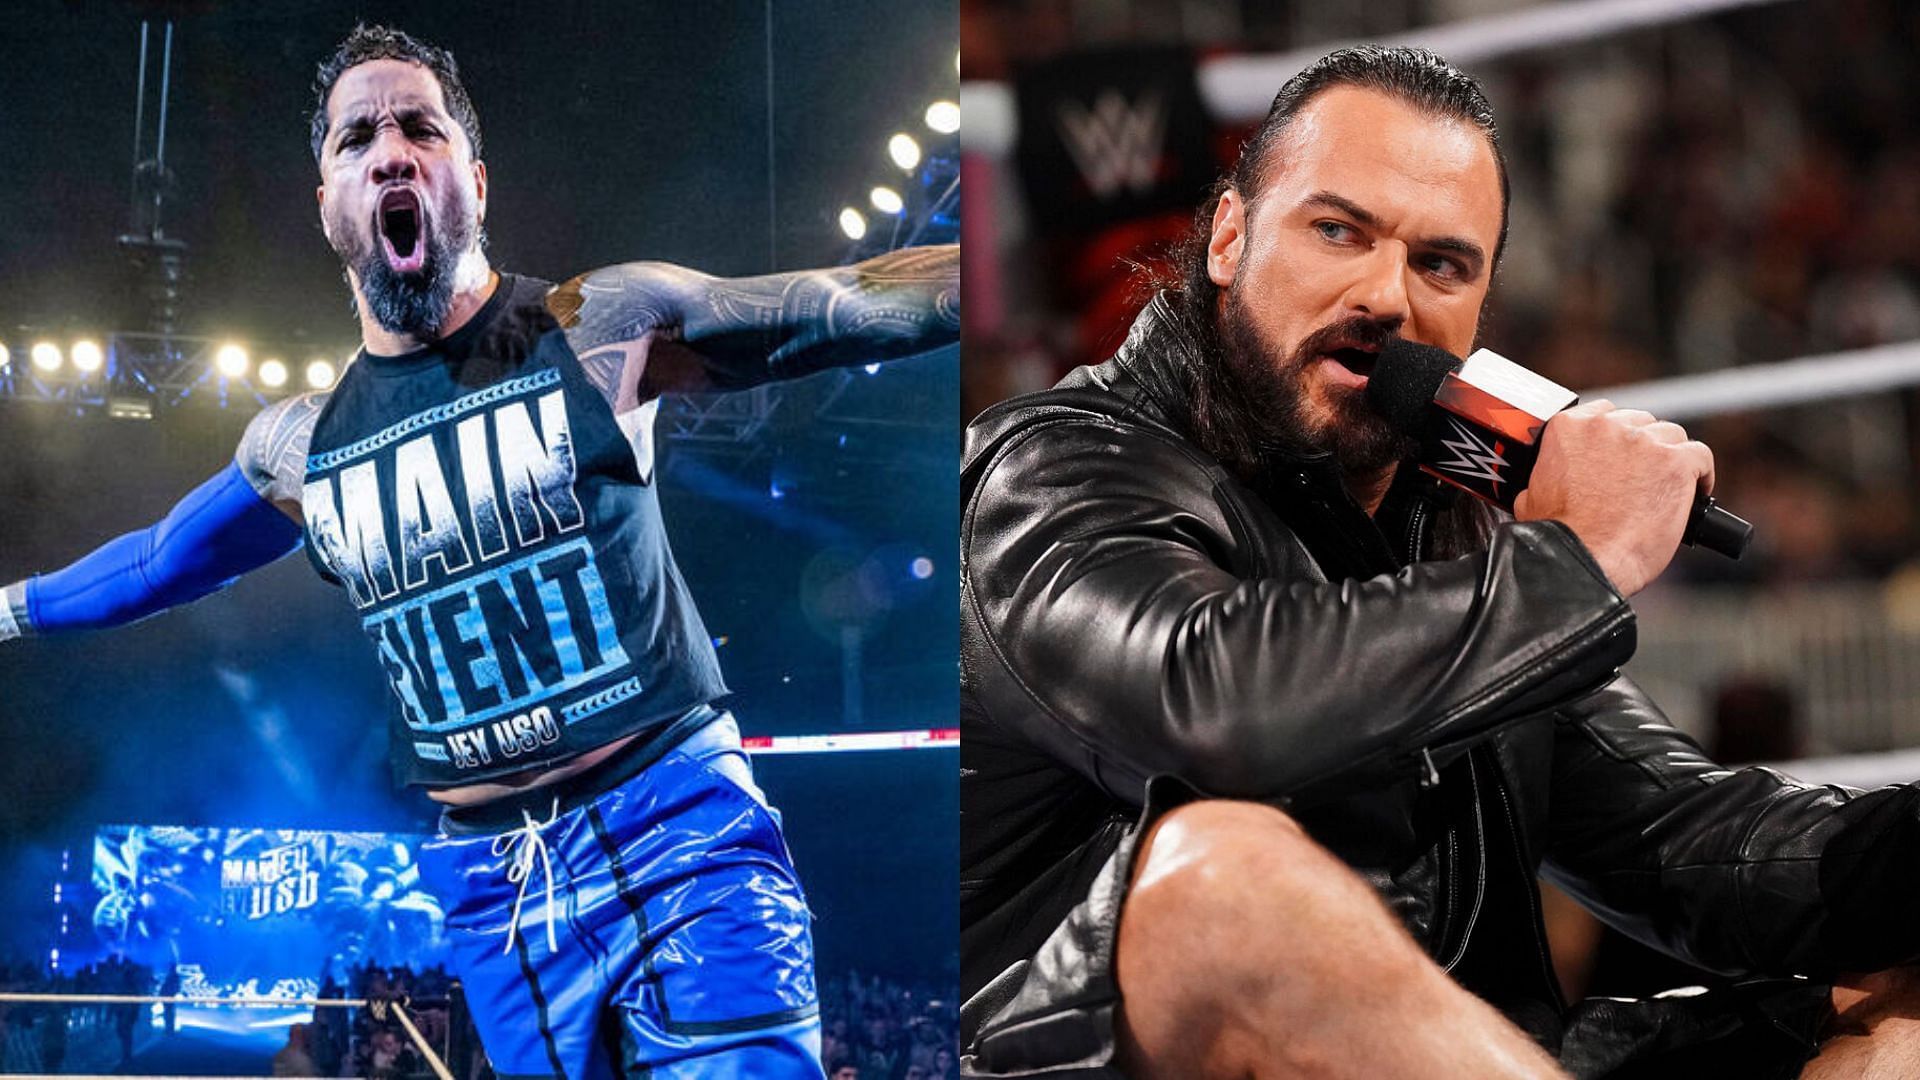 Jey Uso and Drew McIntyre will face off in a match next week on RAW